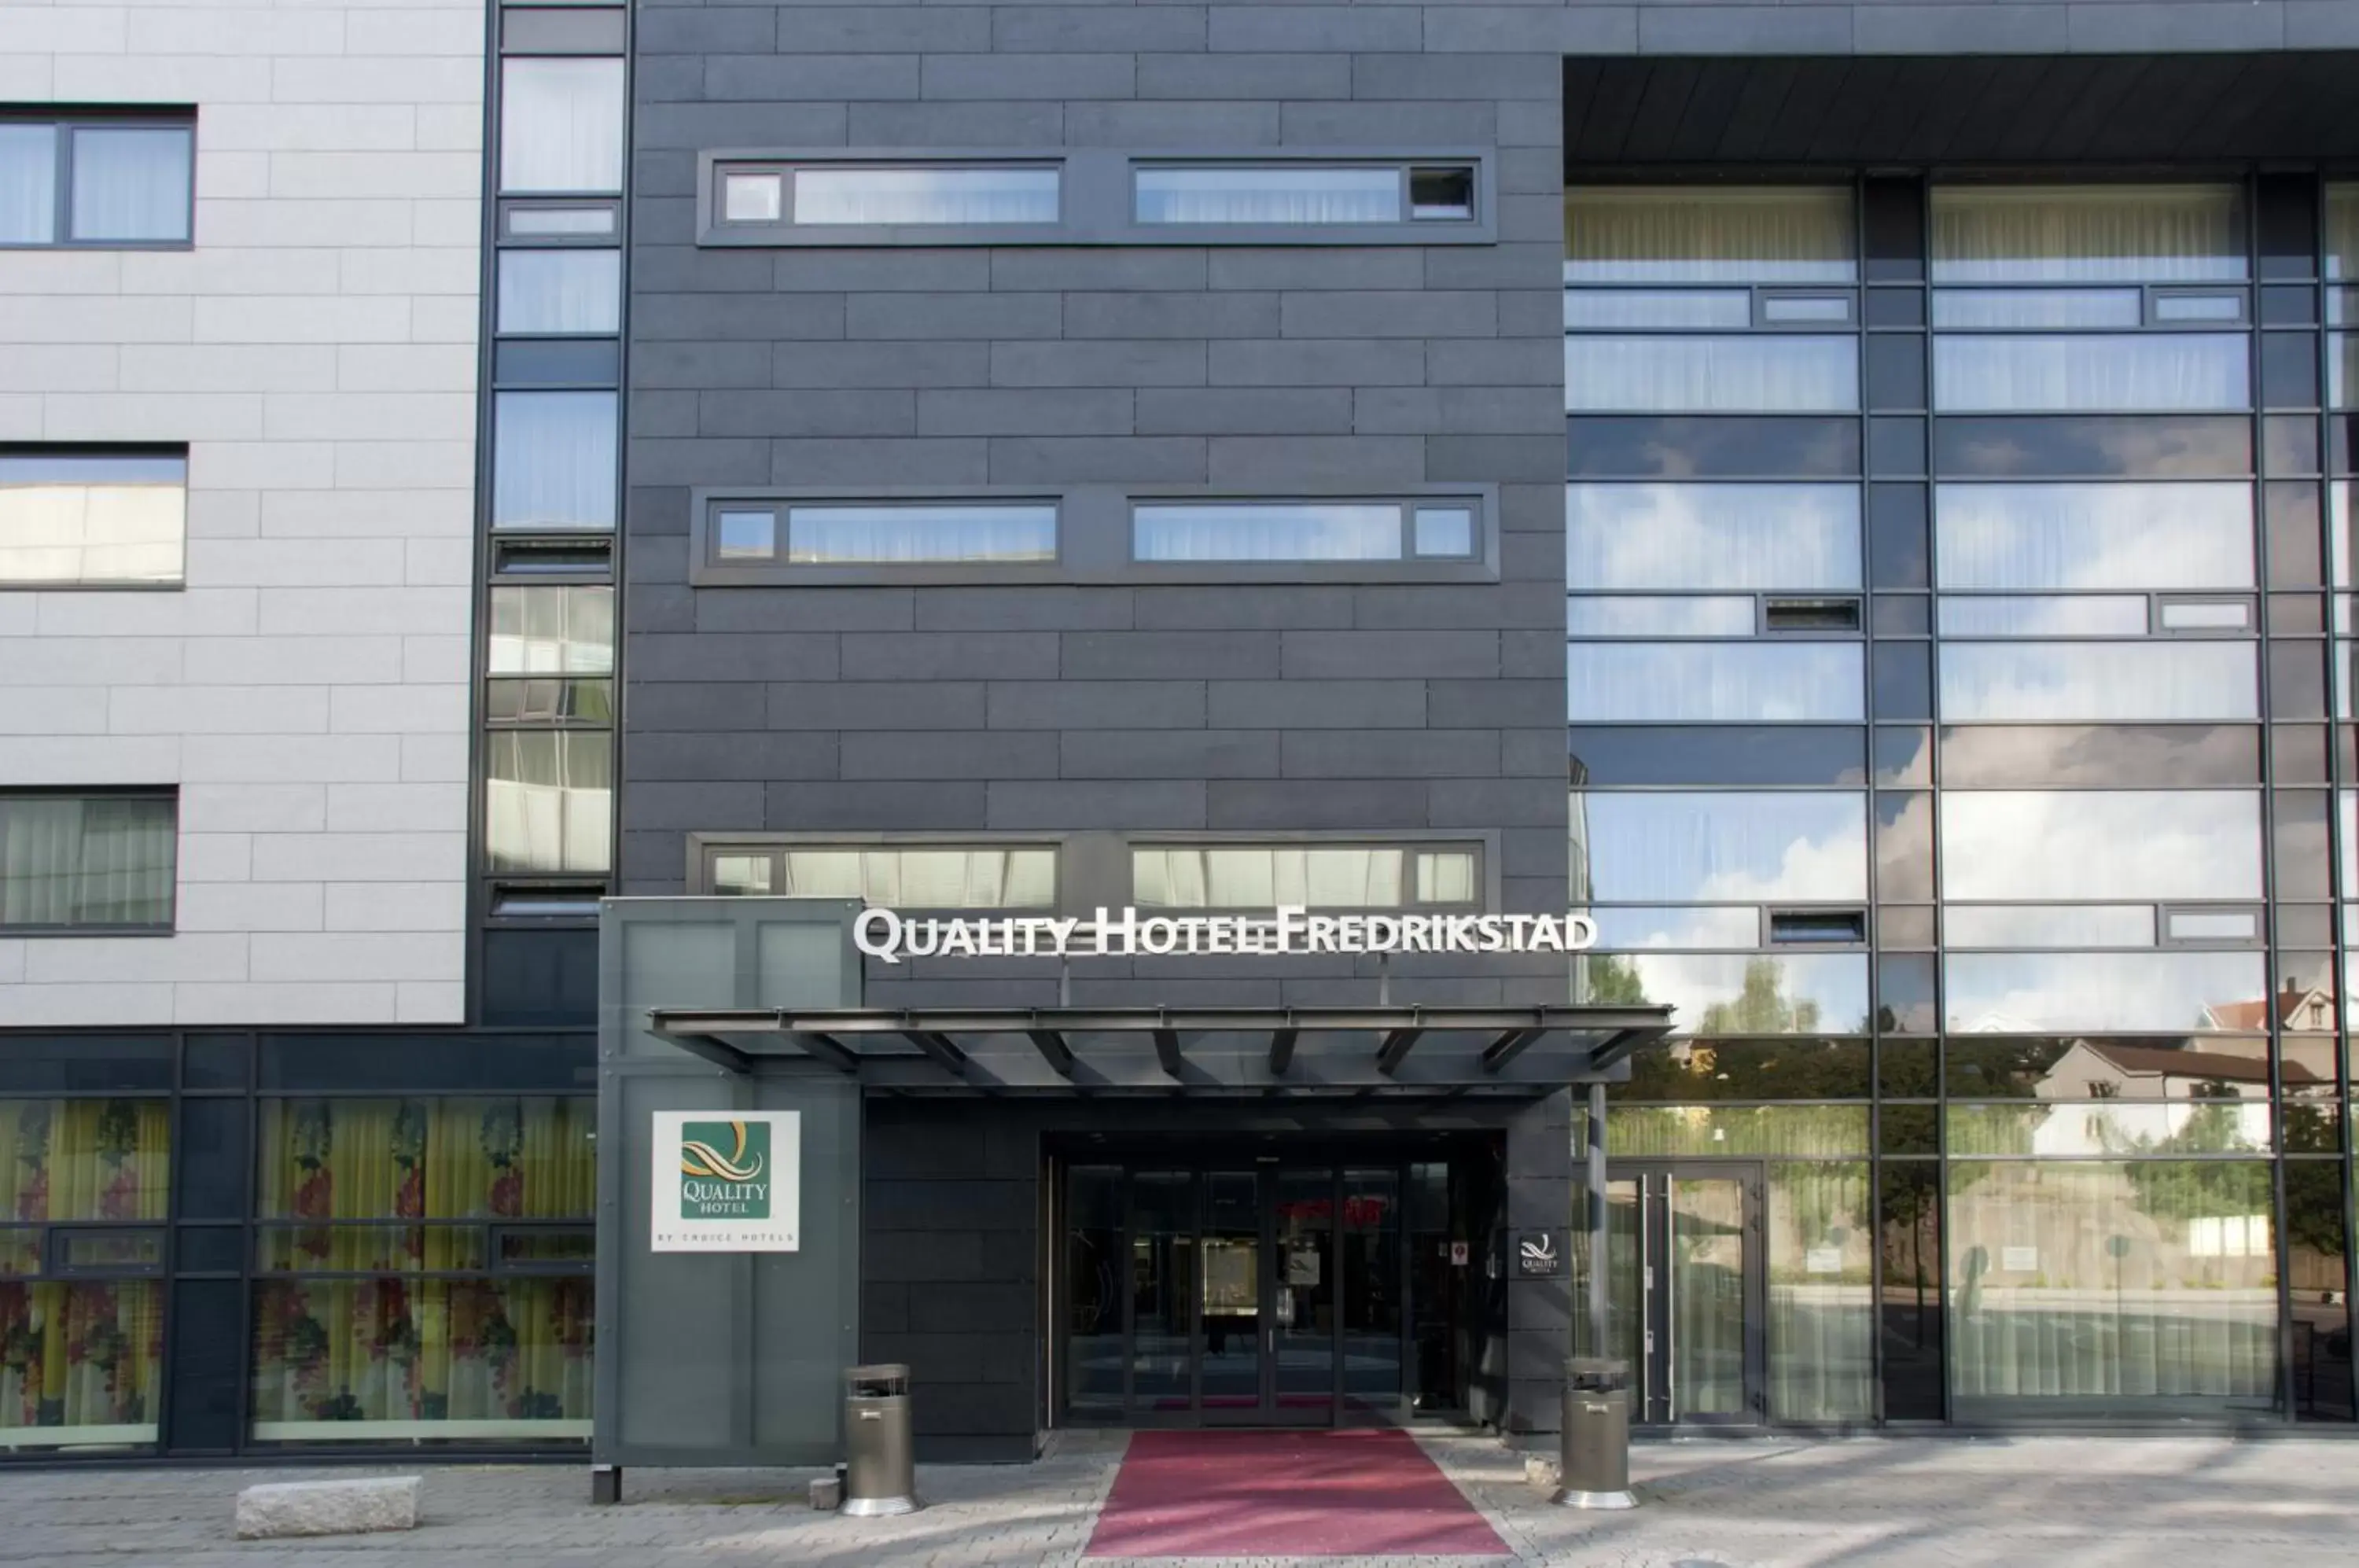 Facade/entrance, Property Building in Quality Hotel Fredrikstad